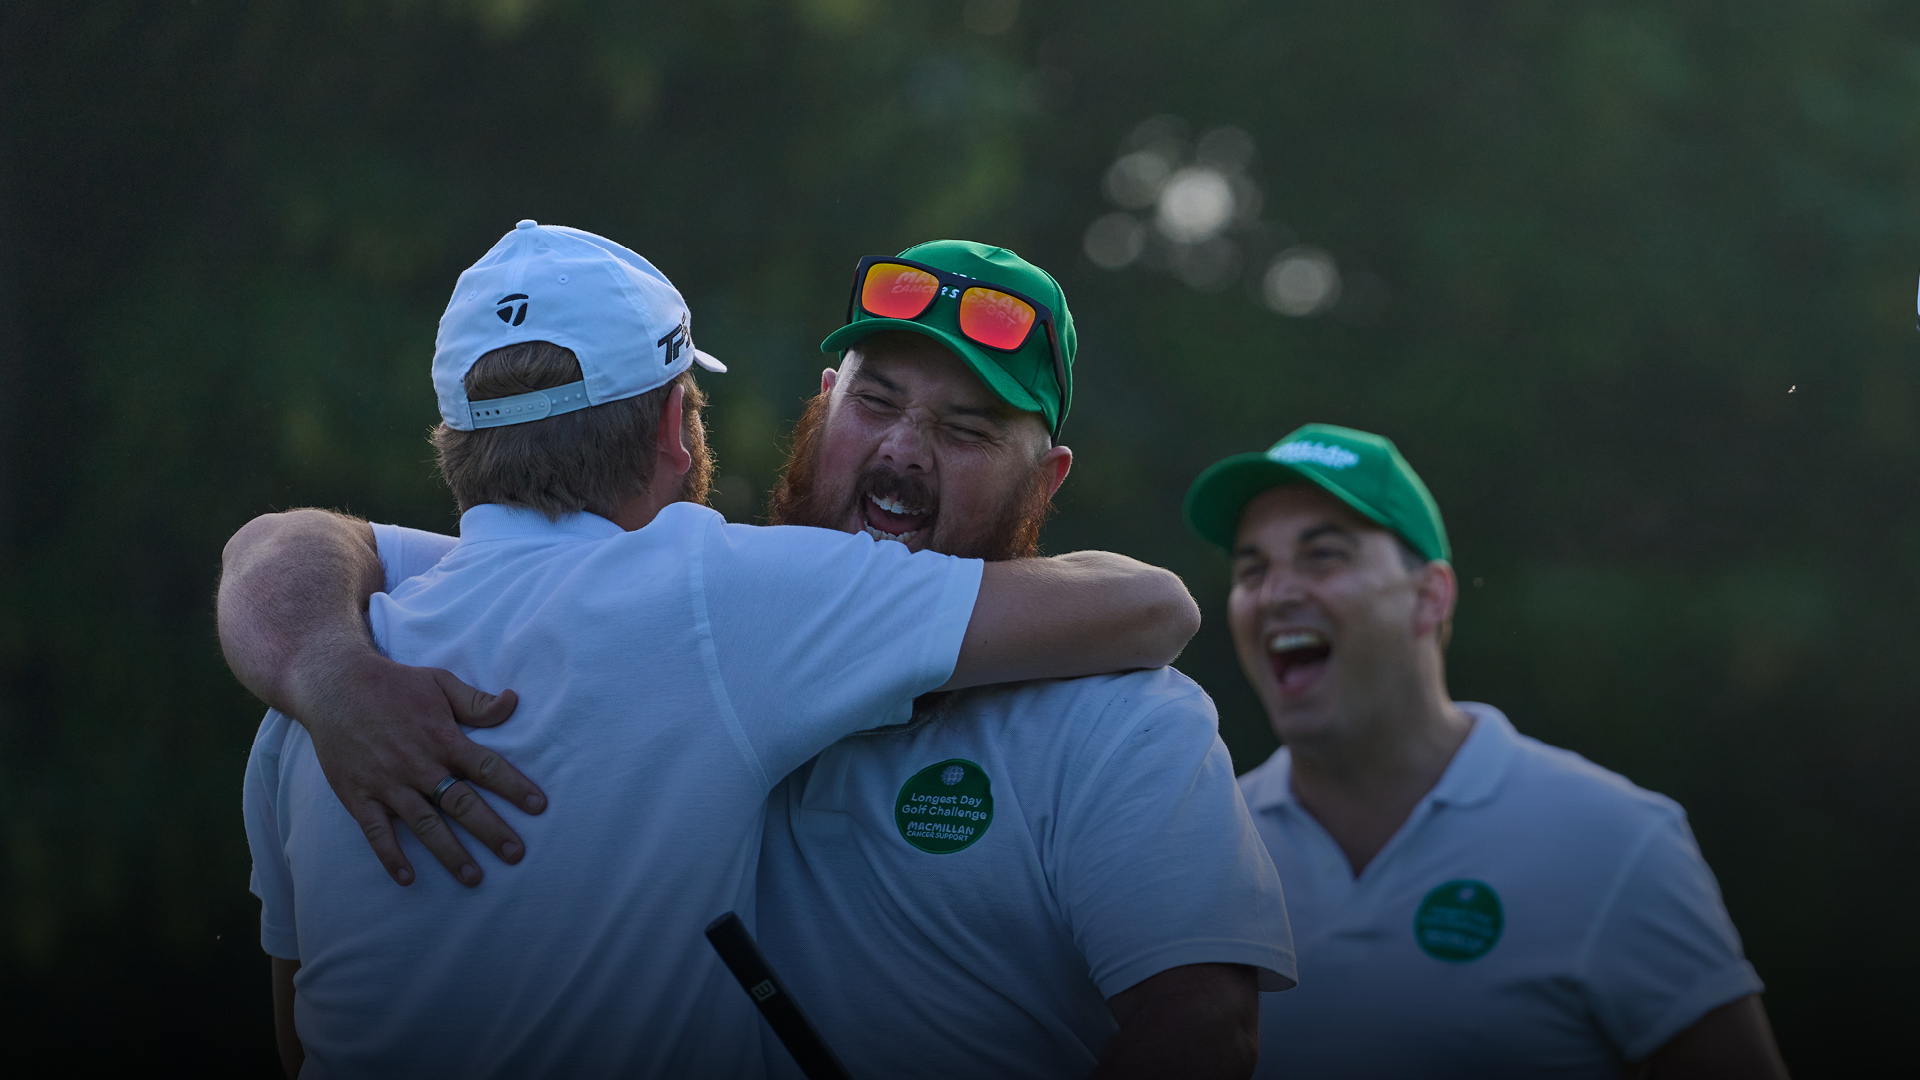 Three men in white shirts and green hats embracing each other with smiles on their faces.